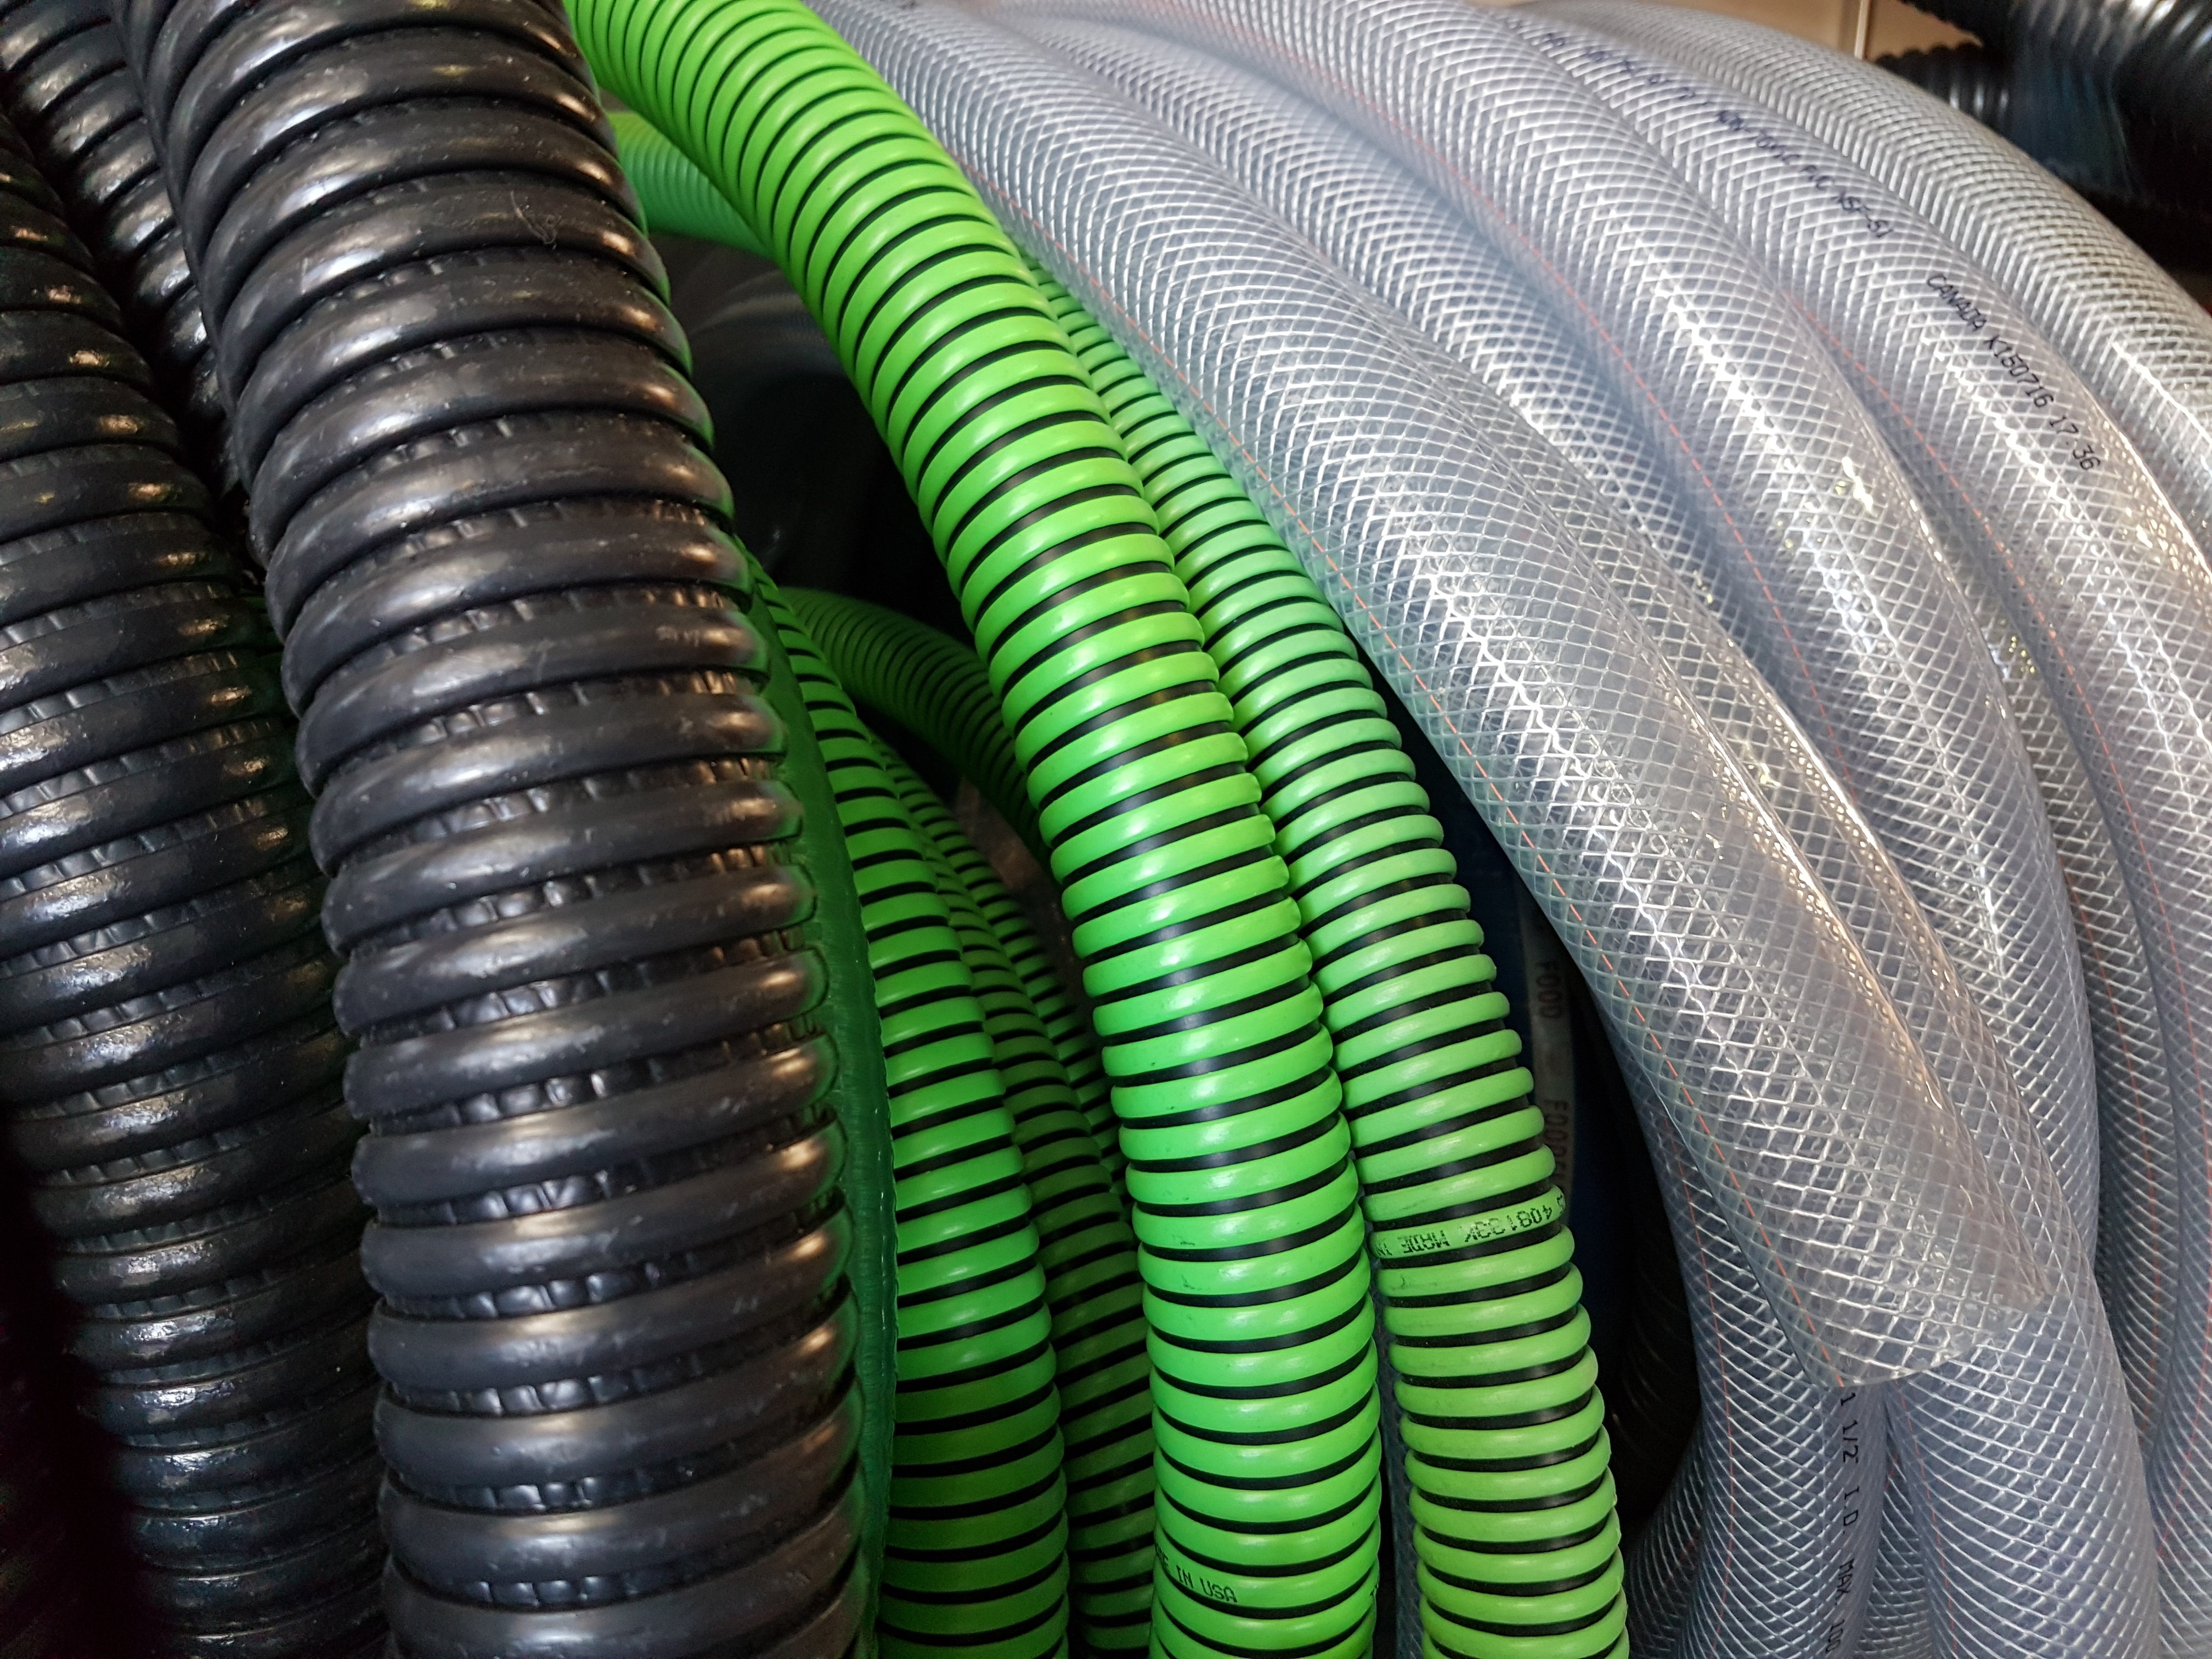 A collection of black, green, and clear hoses rolled together. 